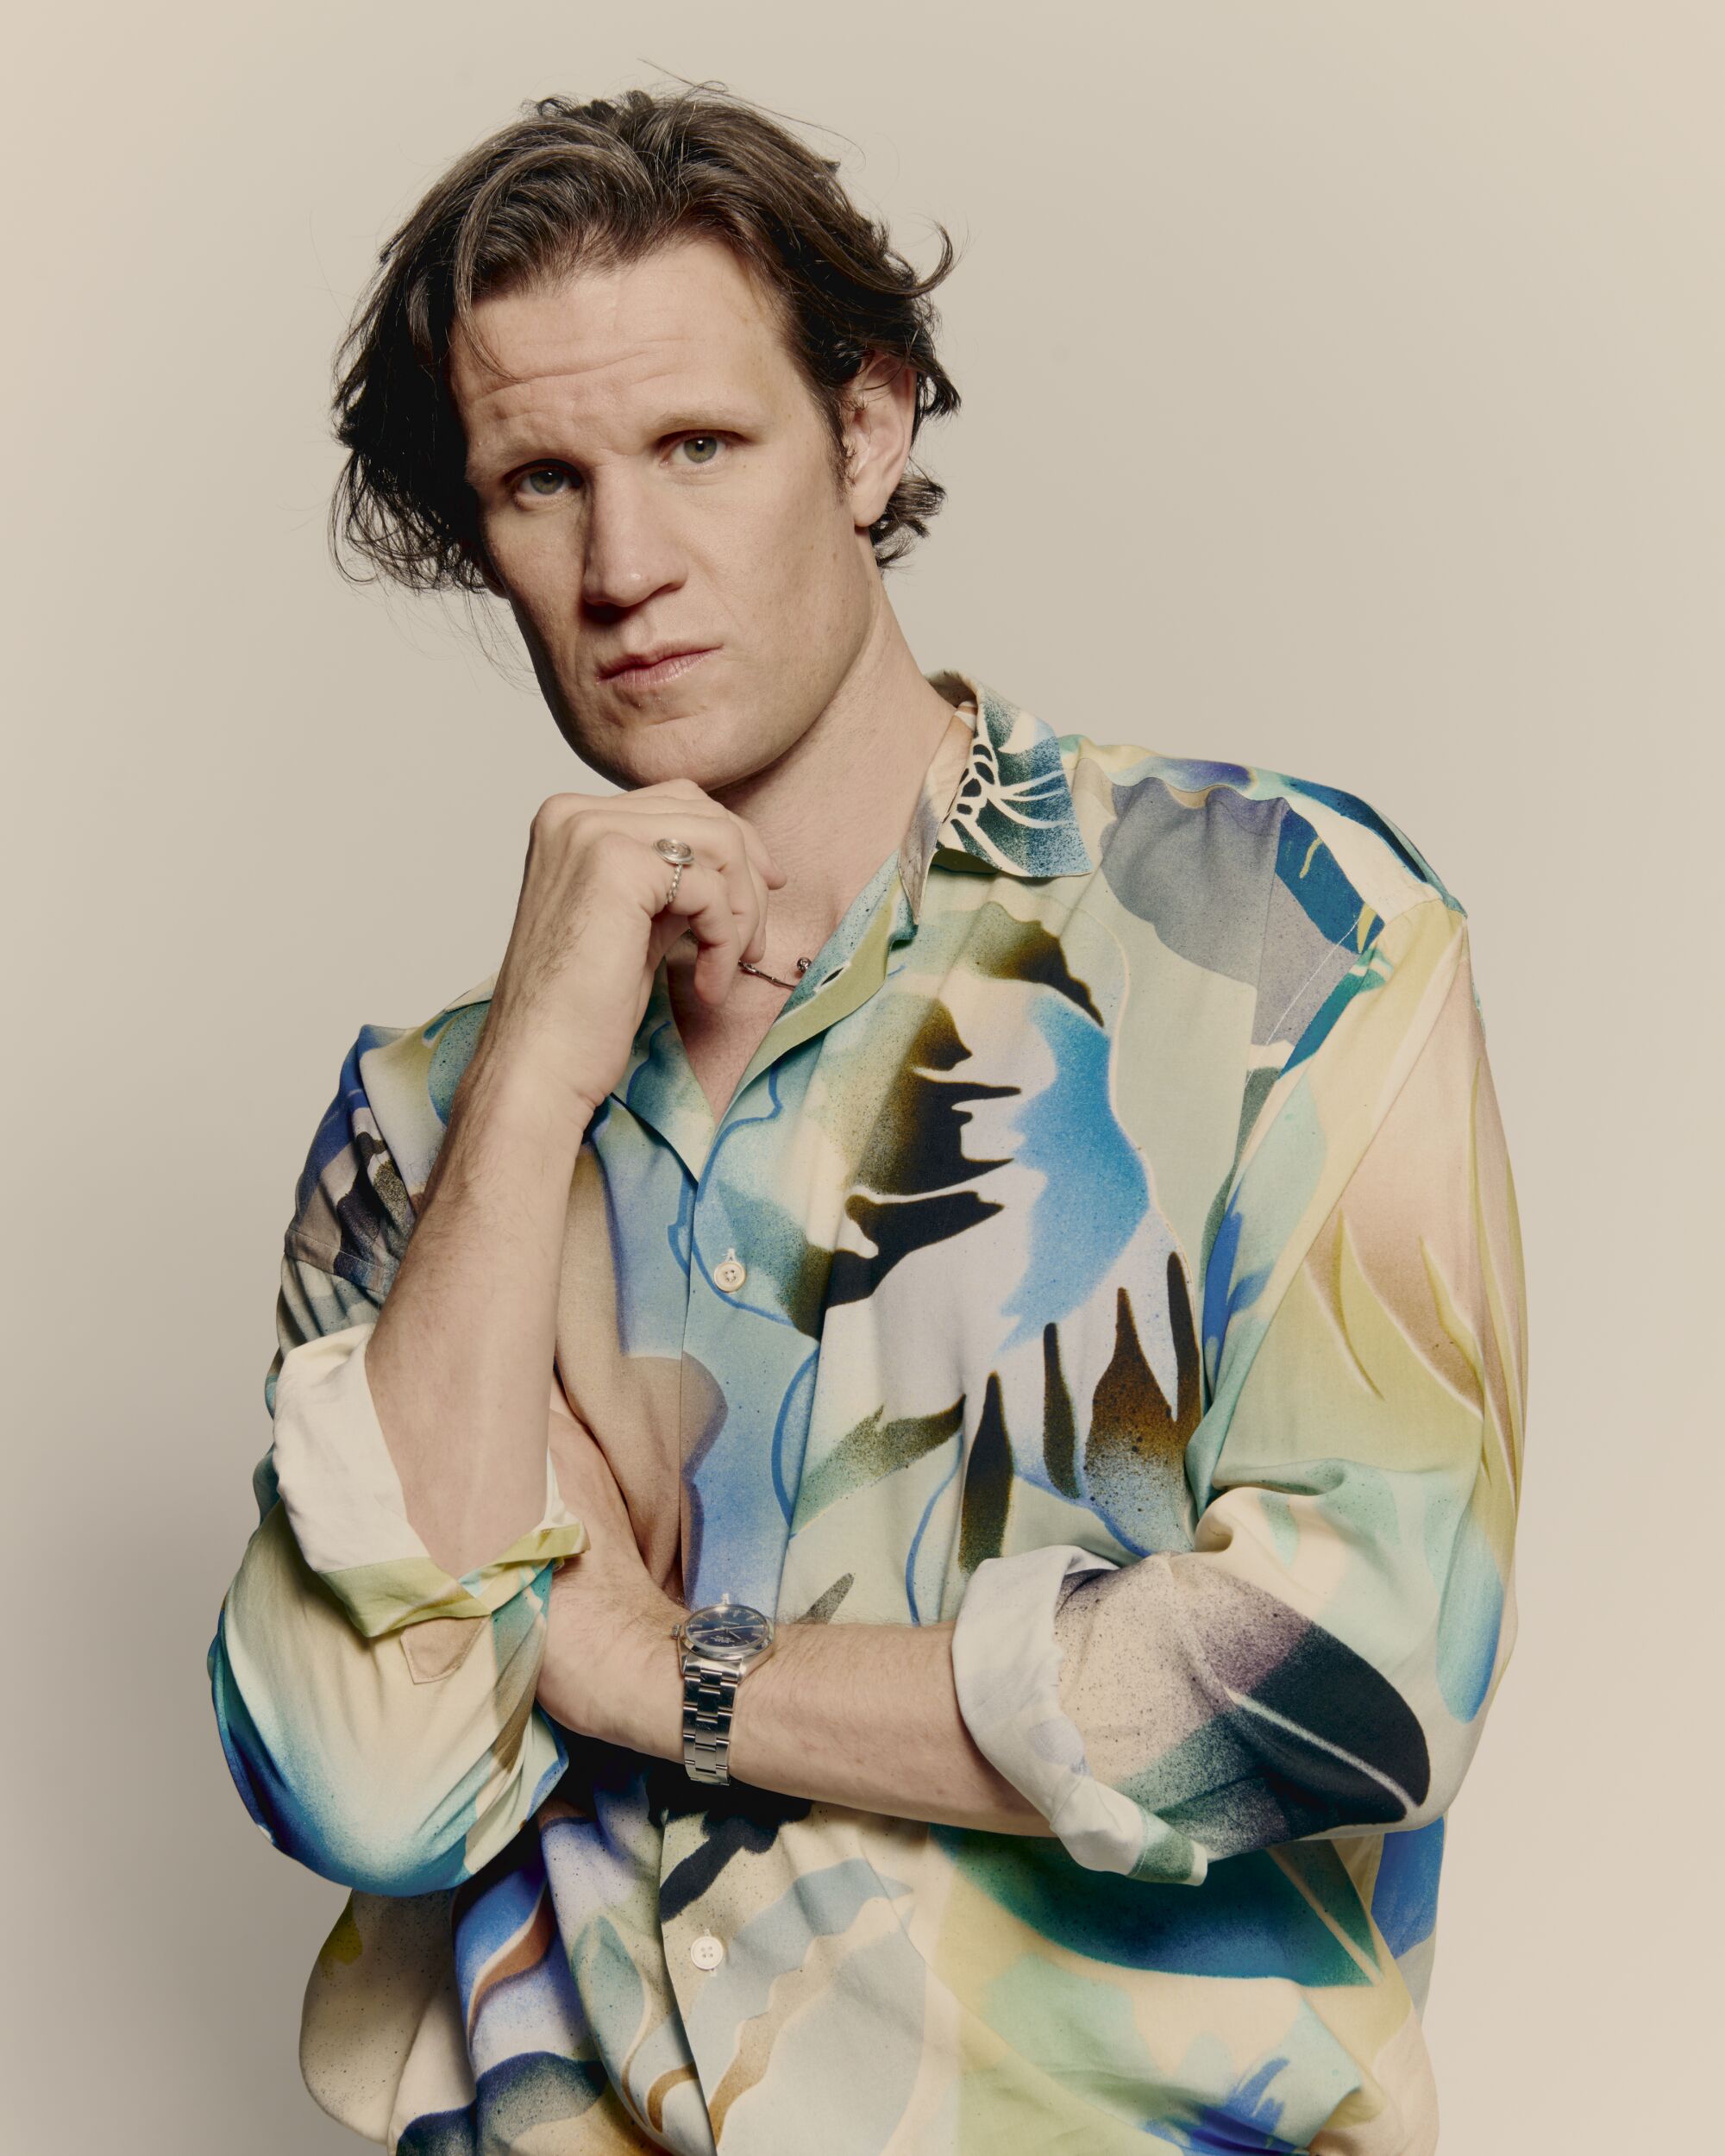 Actor Matt Smith in a colorful patterned shirt